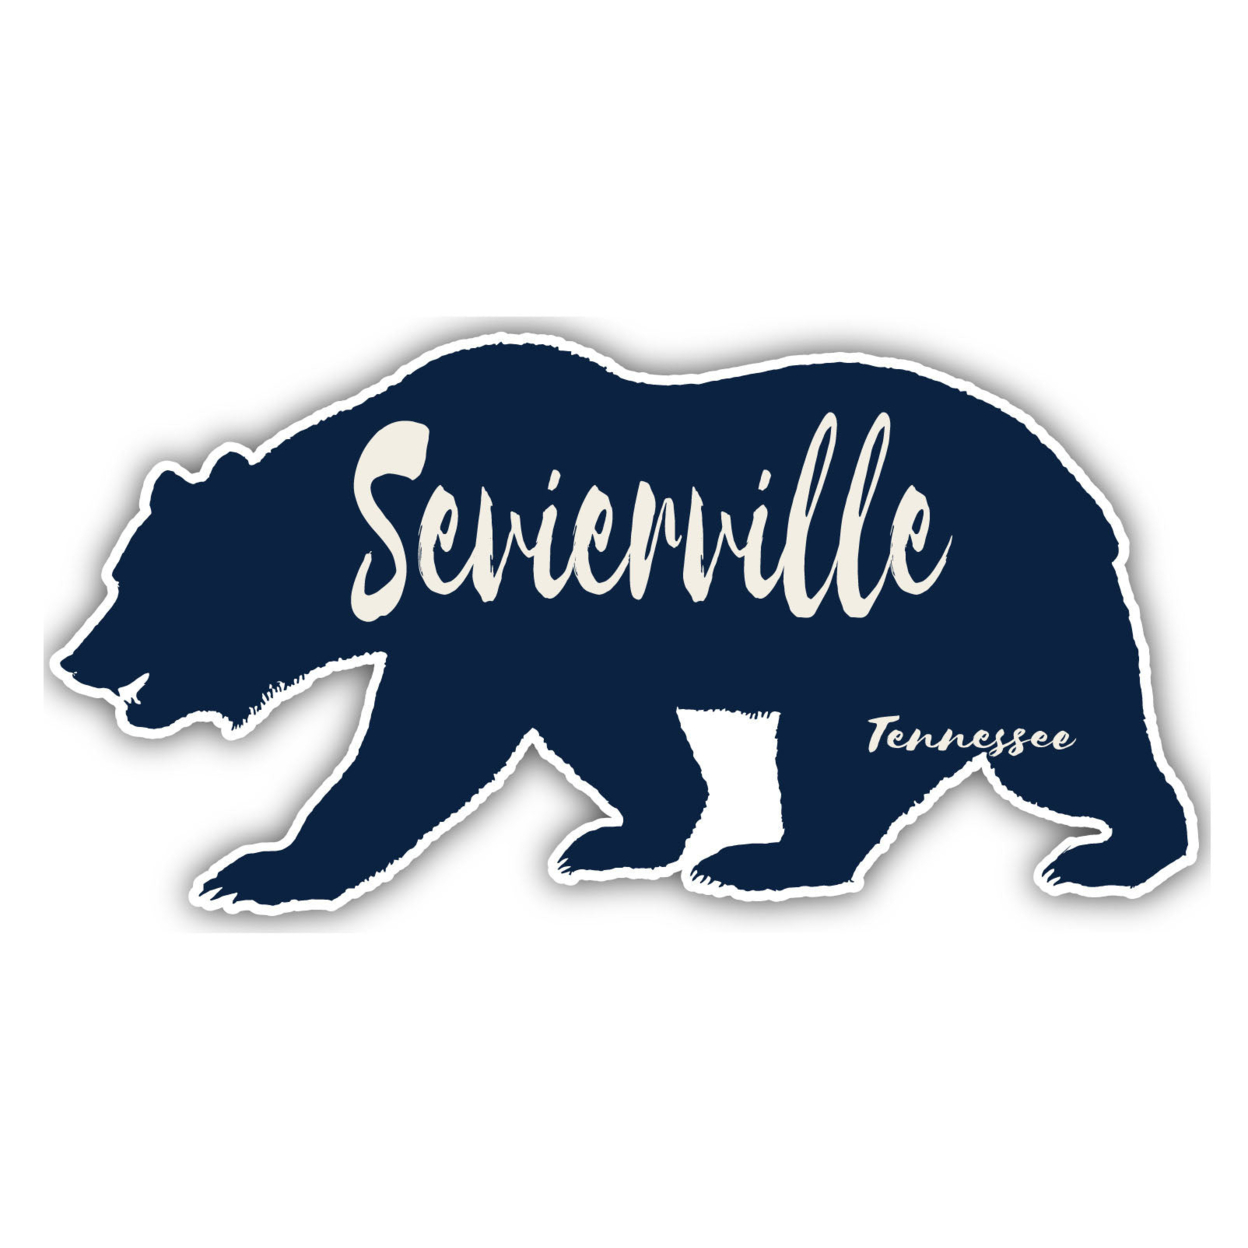 Sevierville Tennessee Souvenir Decorative Stickers (Choose Theme And Size) - Single Unit, 2-Inch, Camp Life